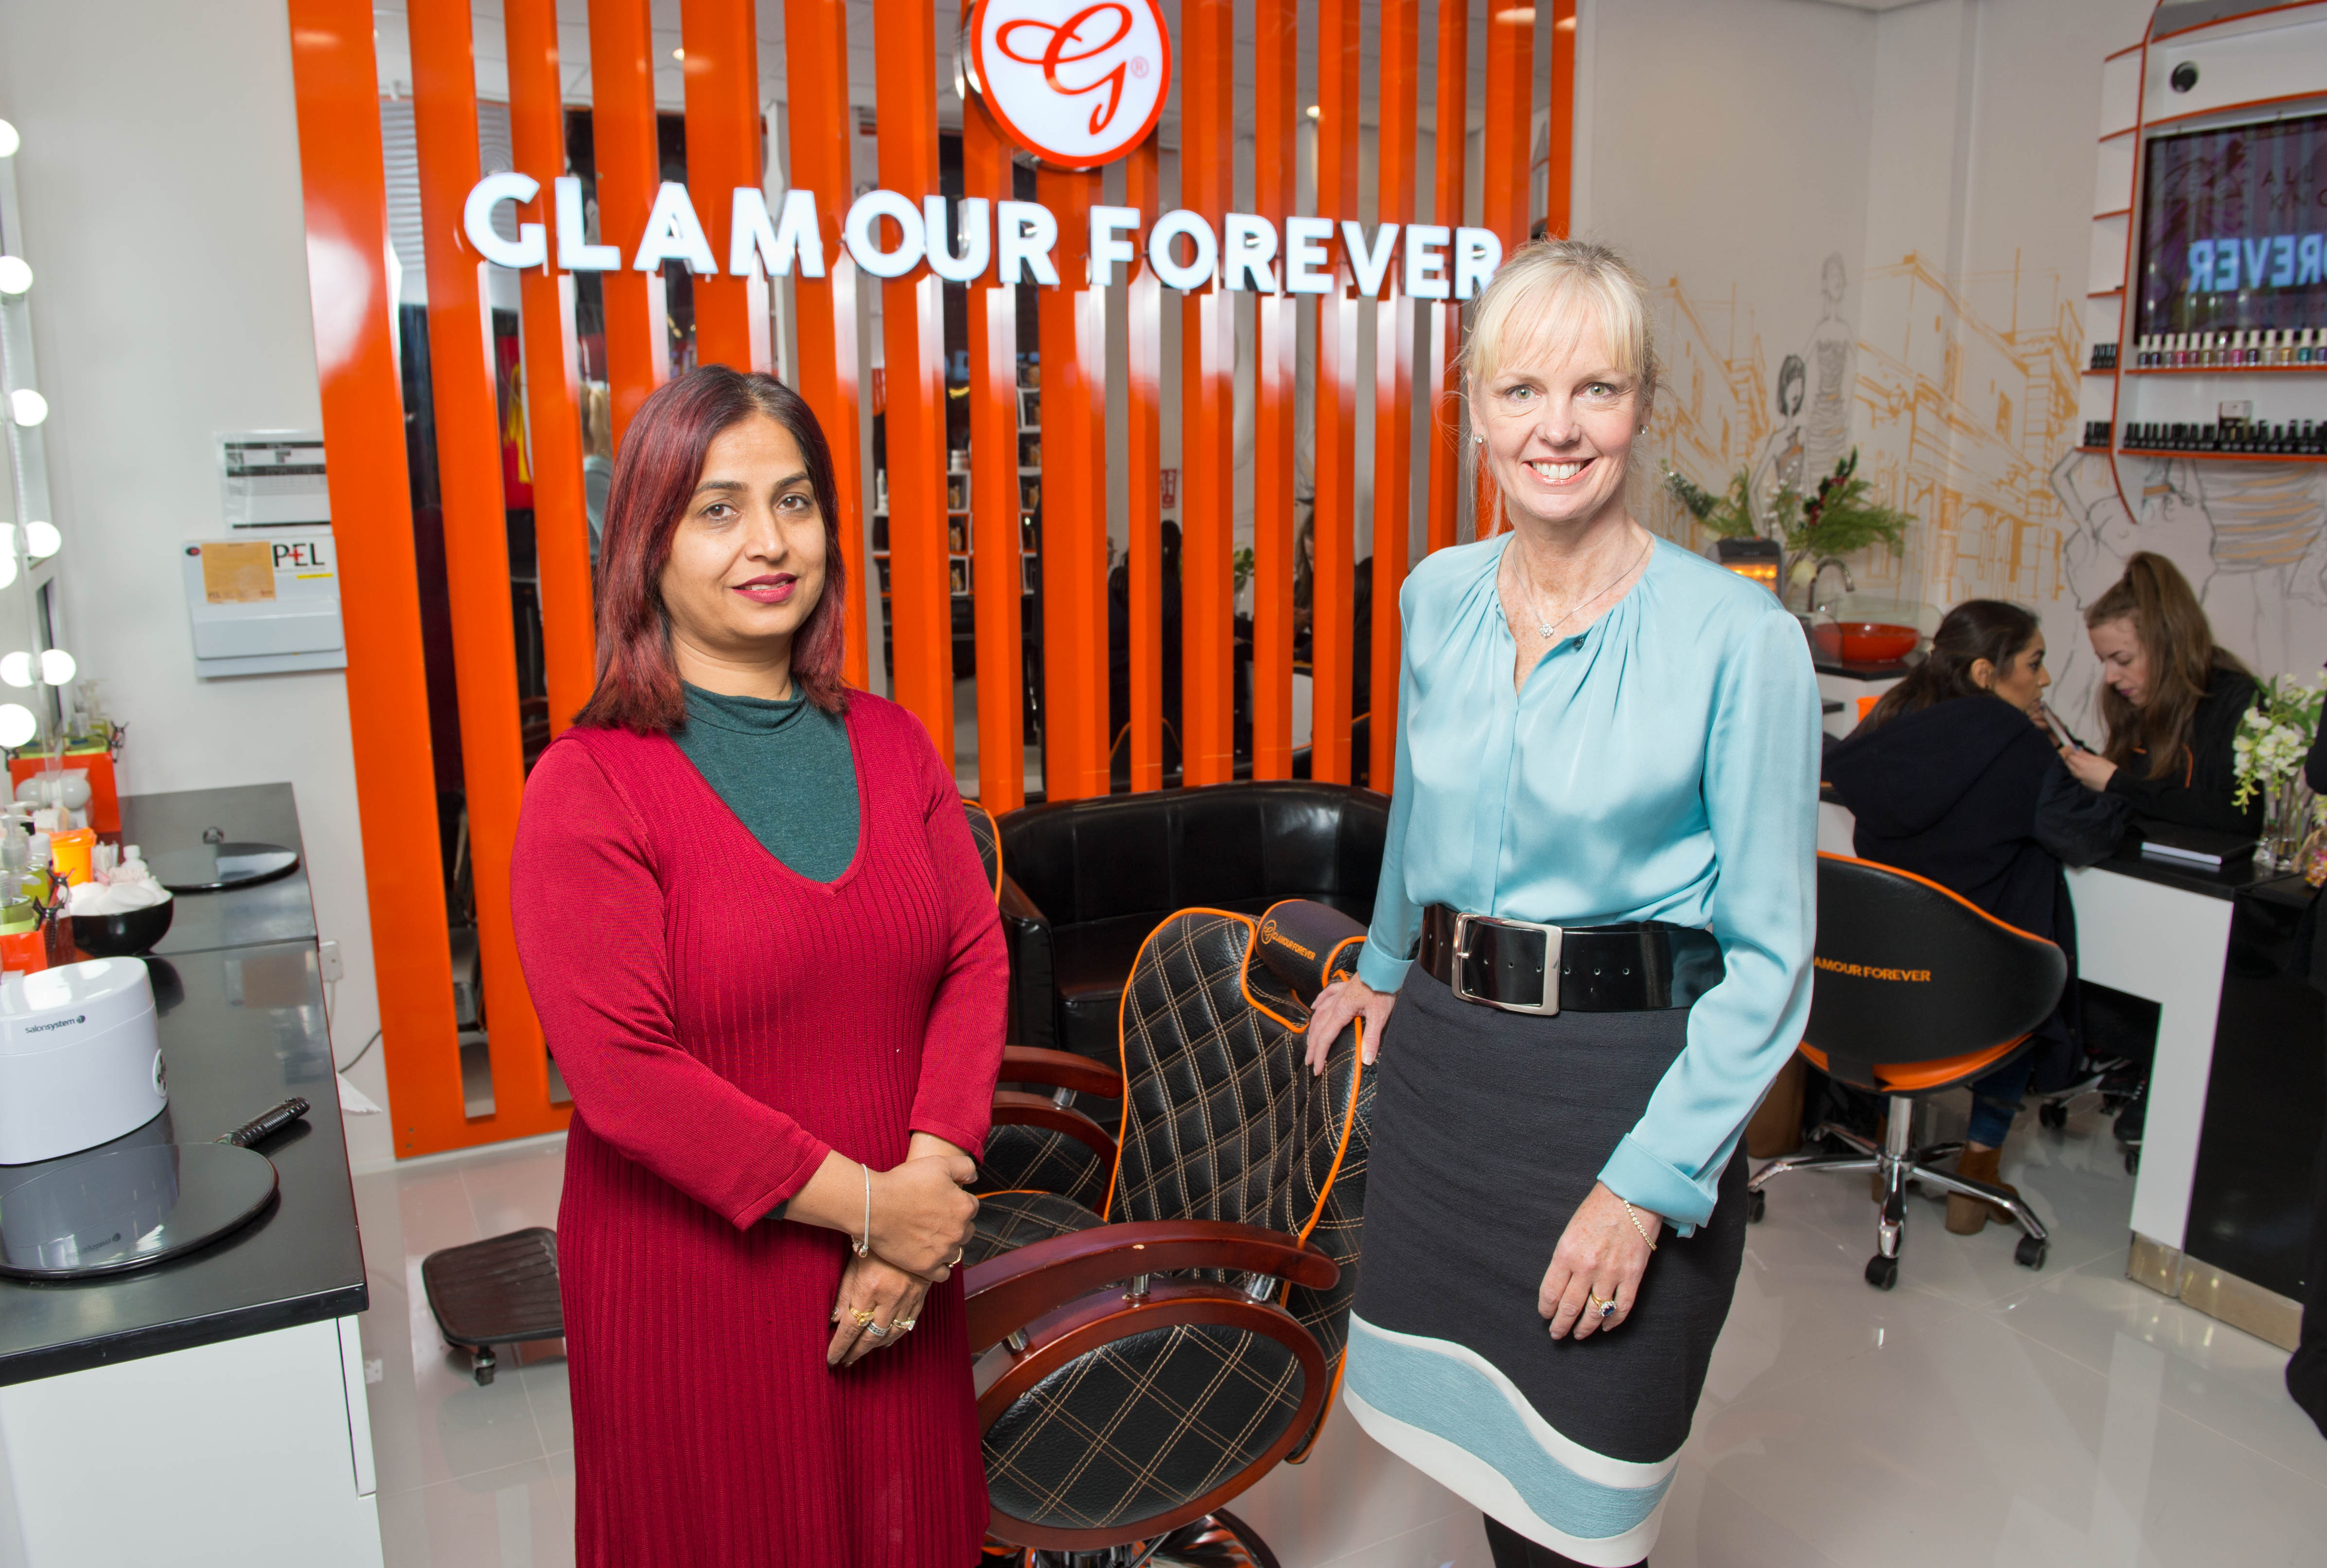 Glamour Forever Opens its Doors as the Merrion Centre's Newest Beauty  Outlet